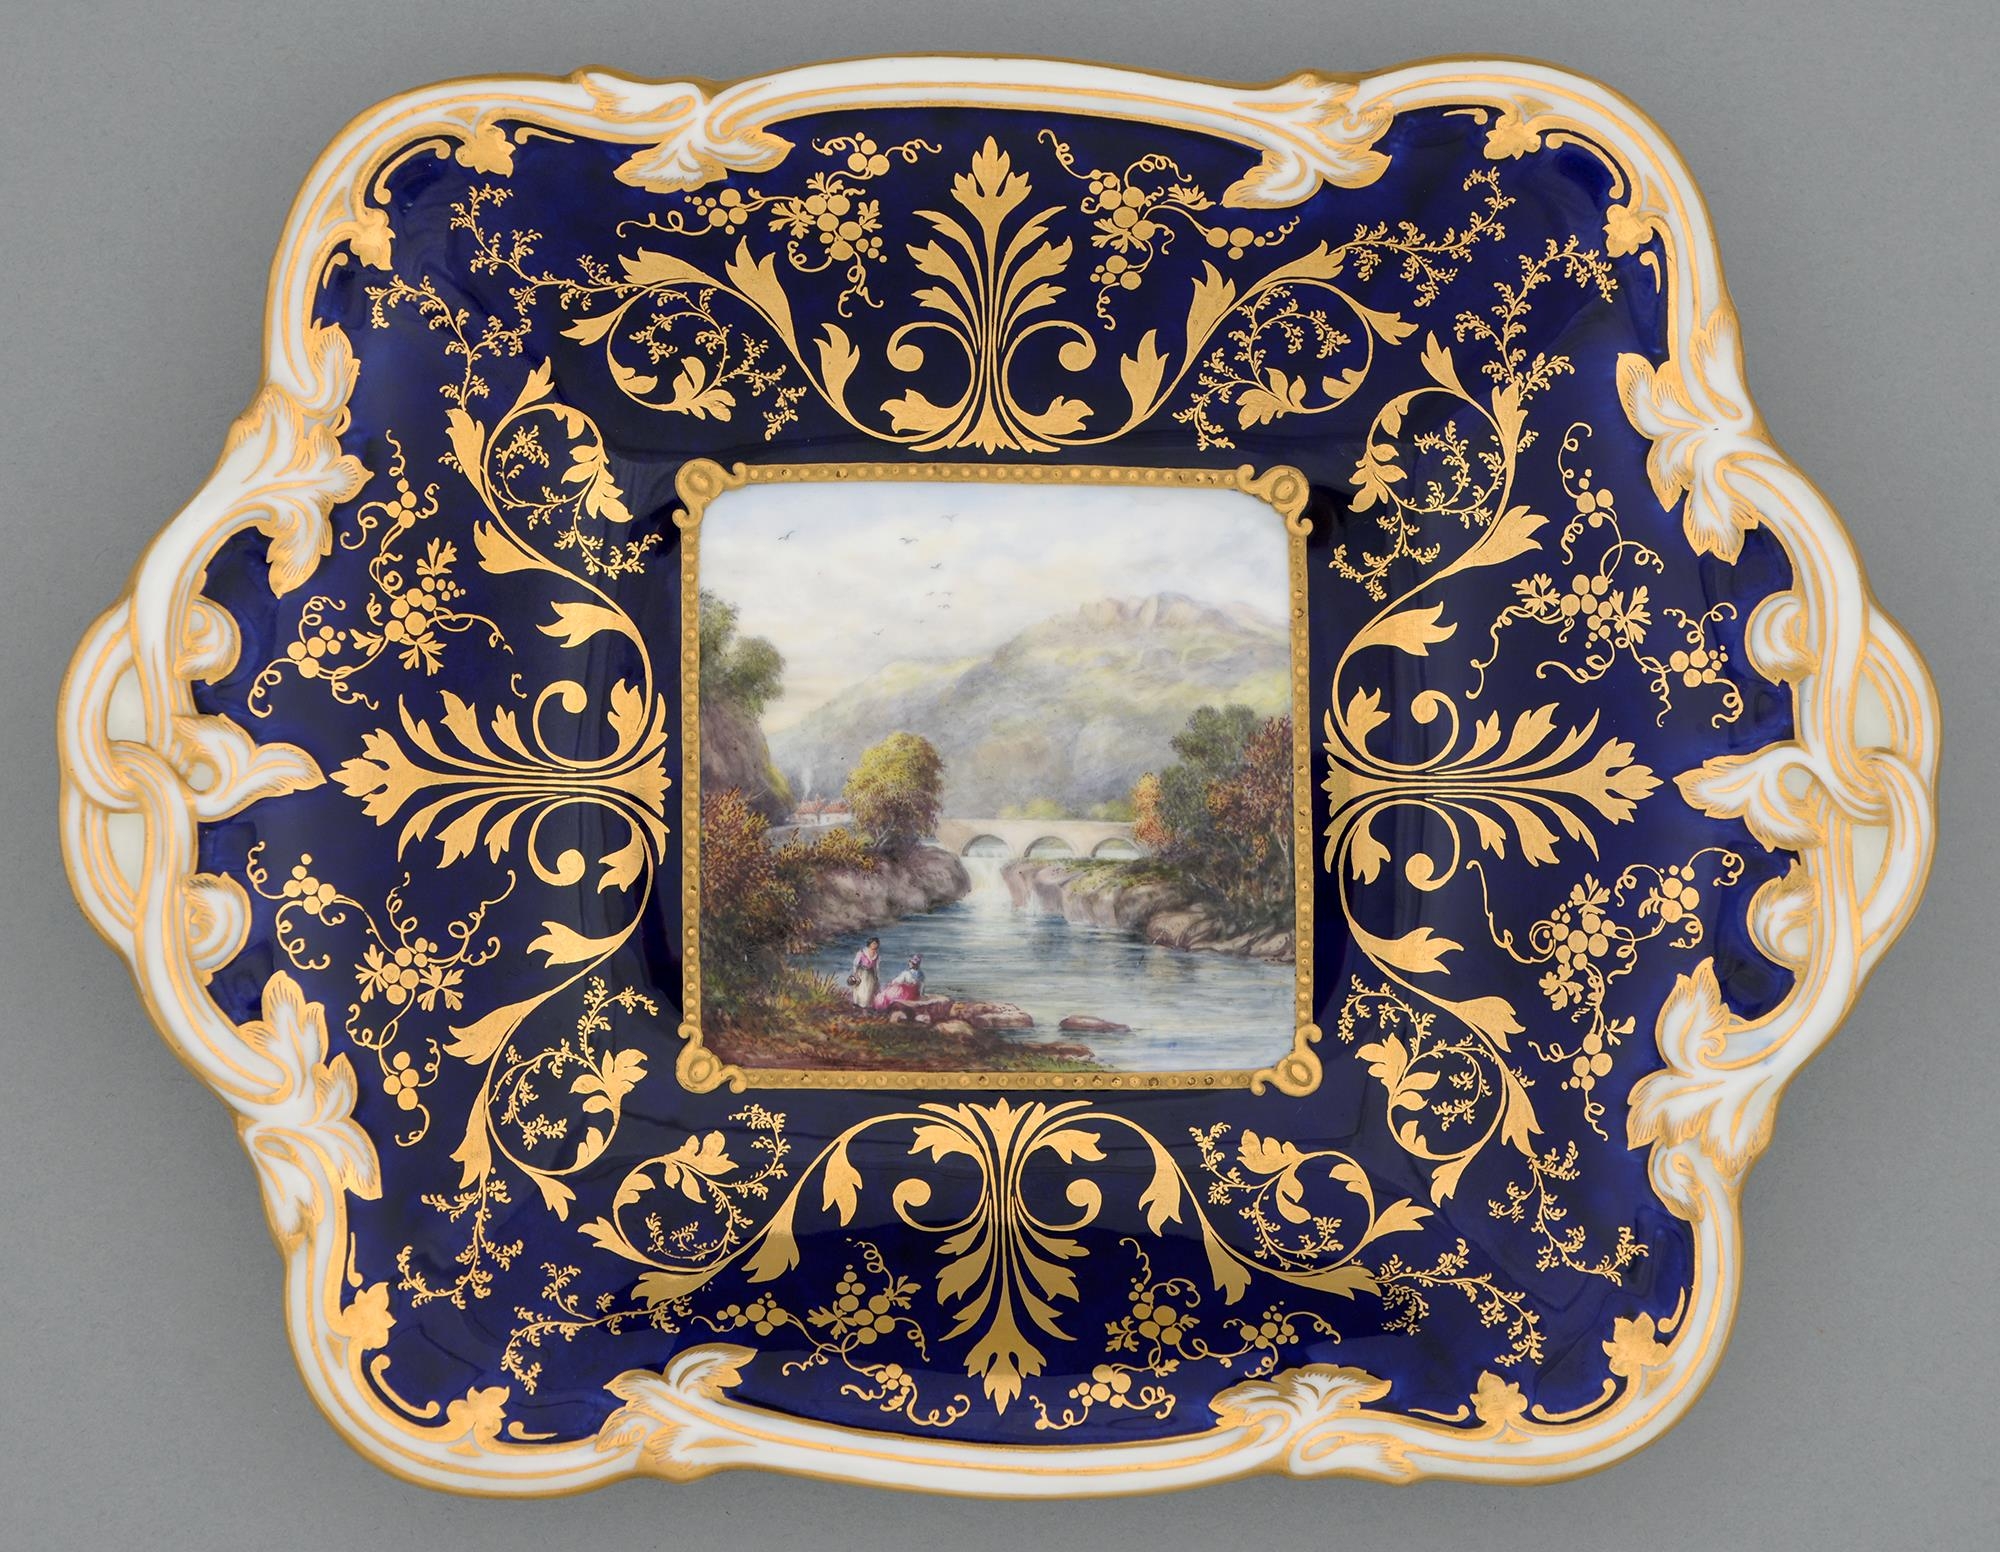 A Sampson Hancock Derby dessert dish, c1930, painted by W E Mosley, signed and inscribed, with